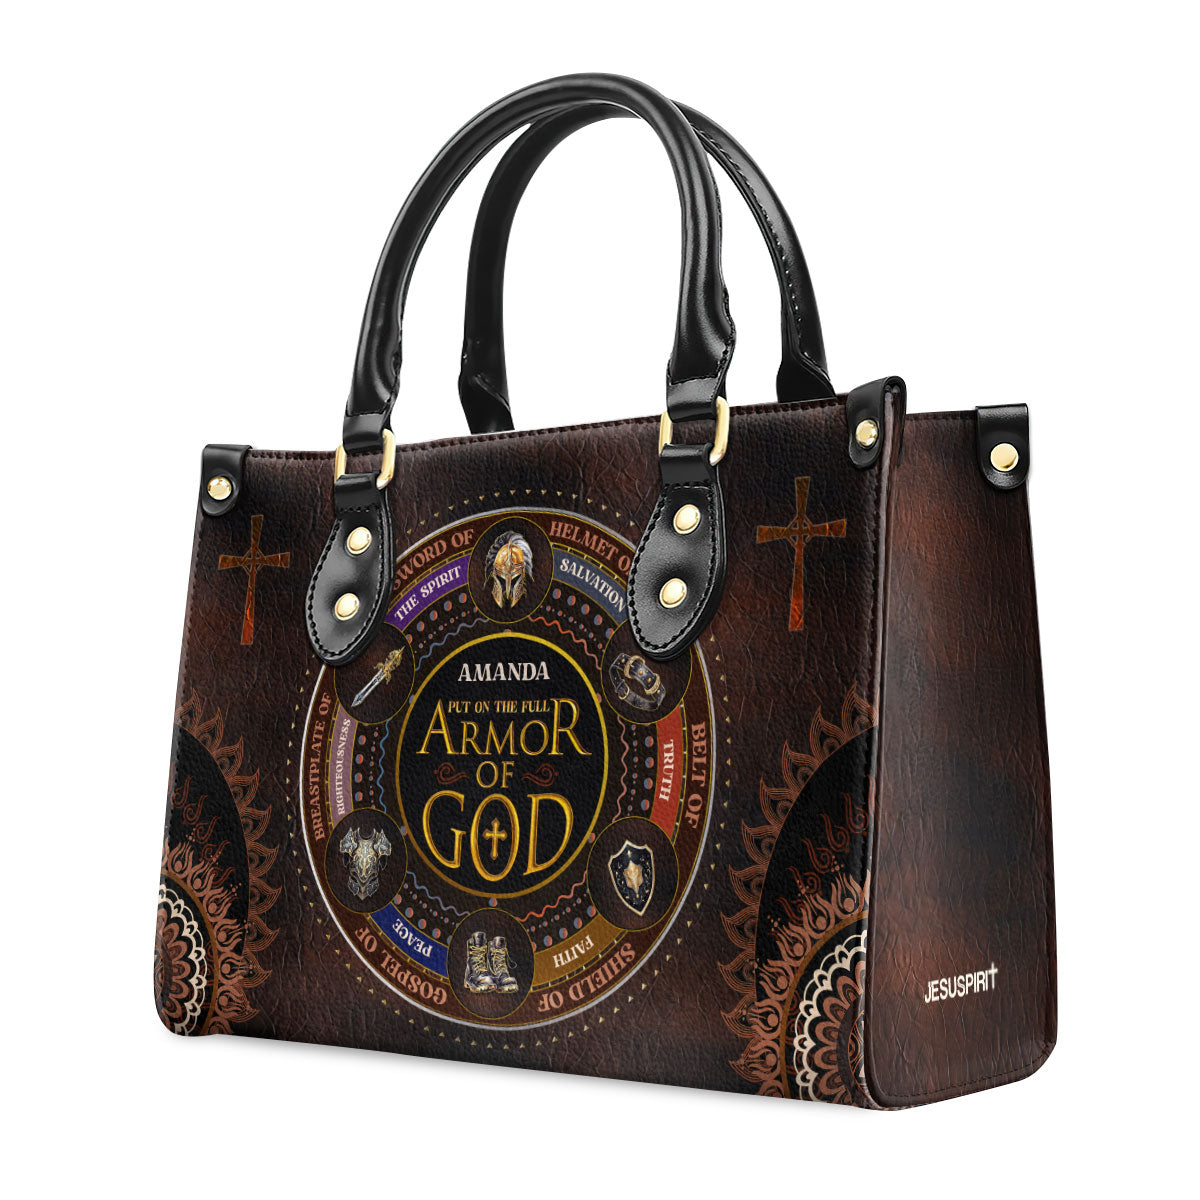 Religious Armor Of God Personalized Leather Handbag With Handle